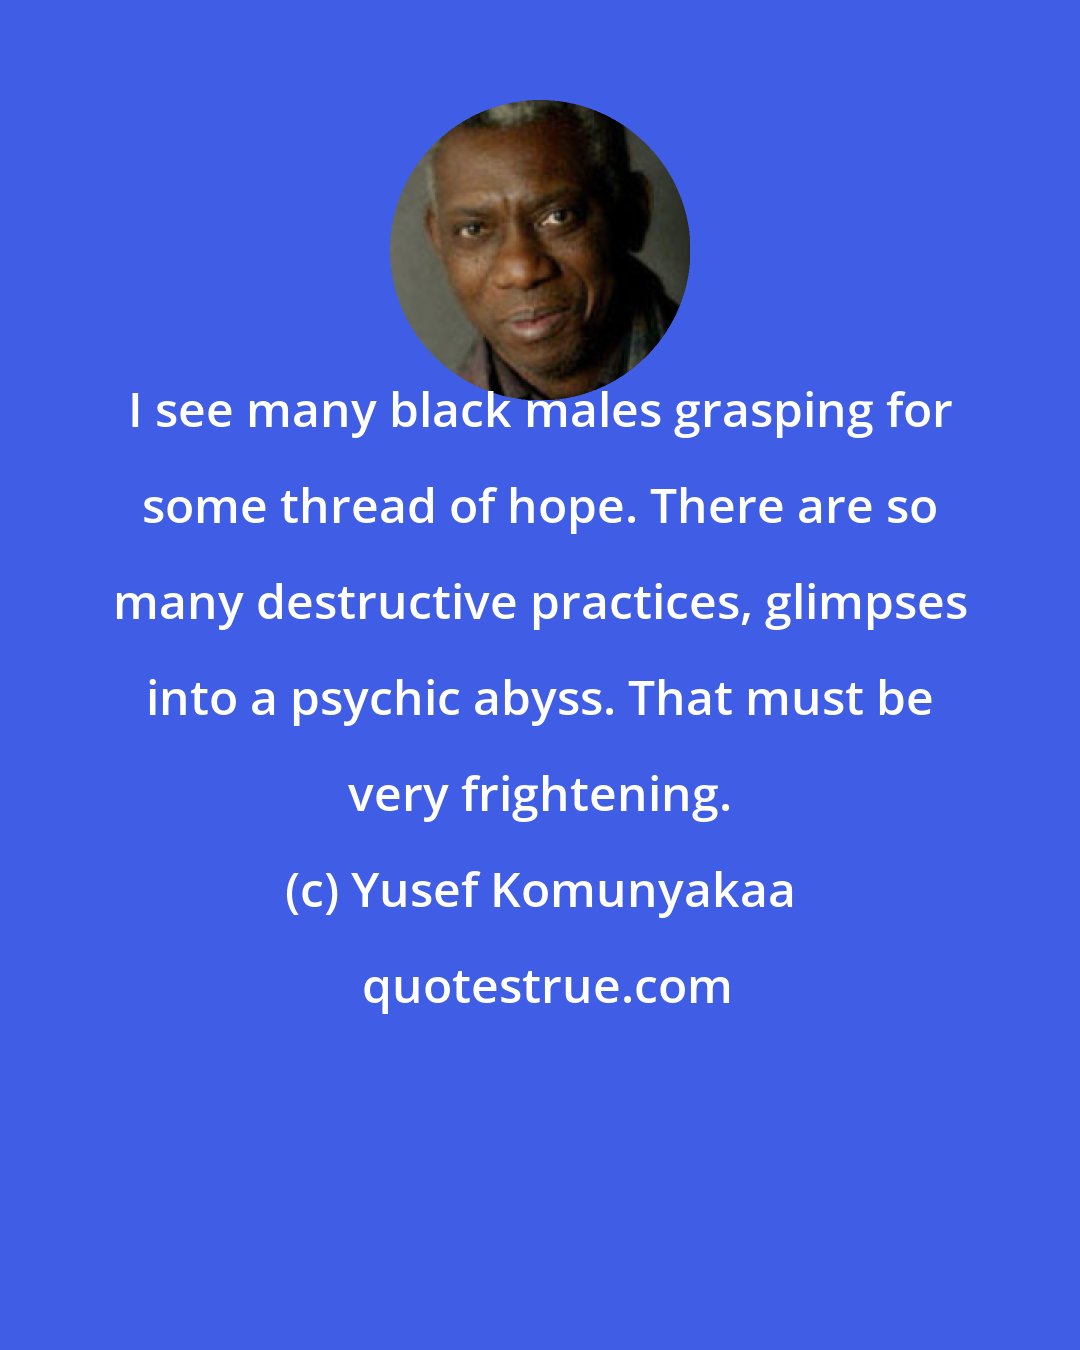 Yusef Komunyakaa: I see many black males grasping for some thread of hope. There are so many destructive practices, glimpses into a psychic abyss. That must be very frightening.